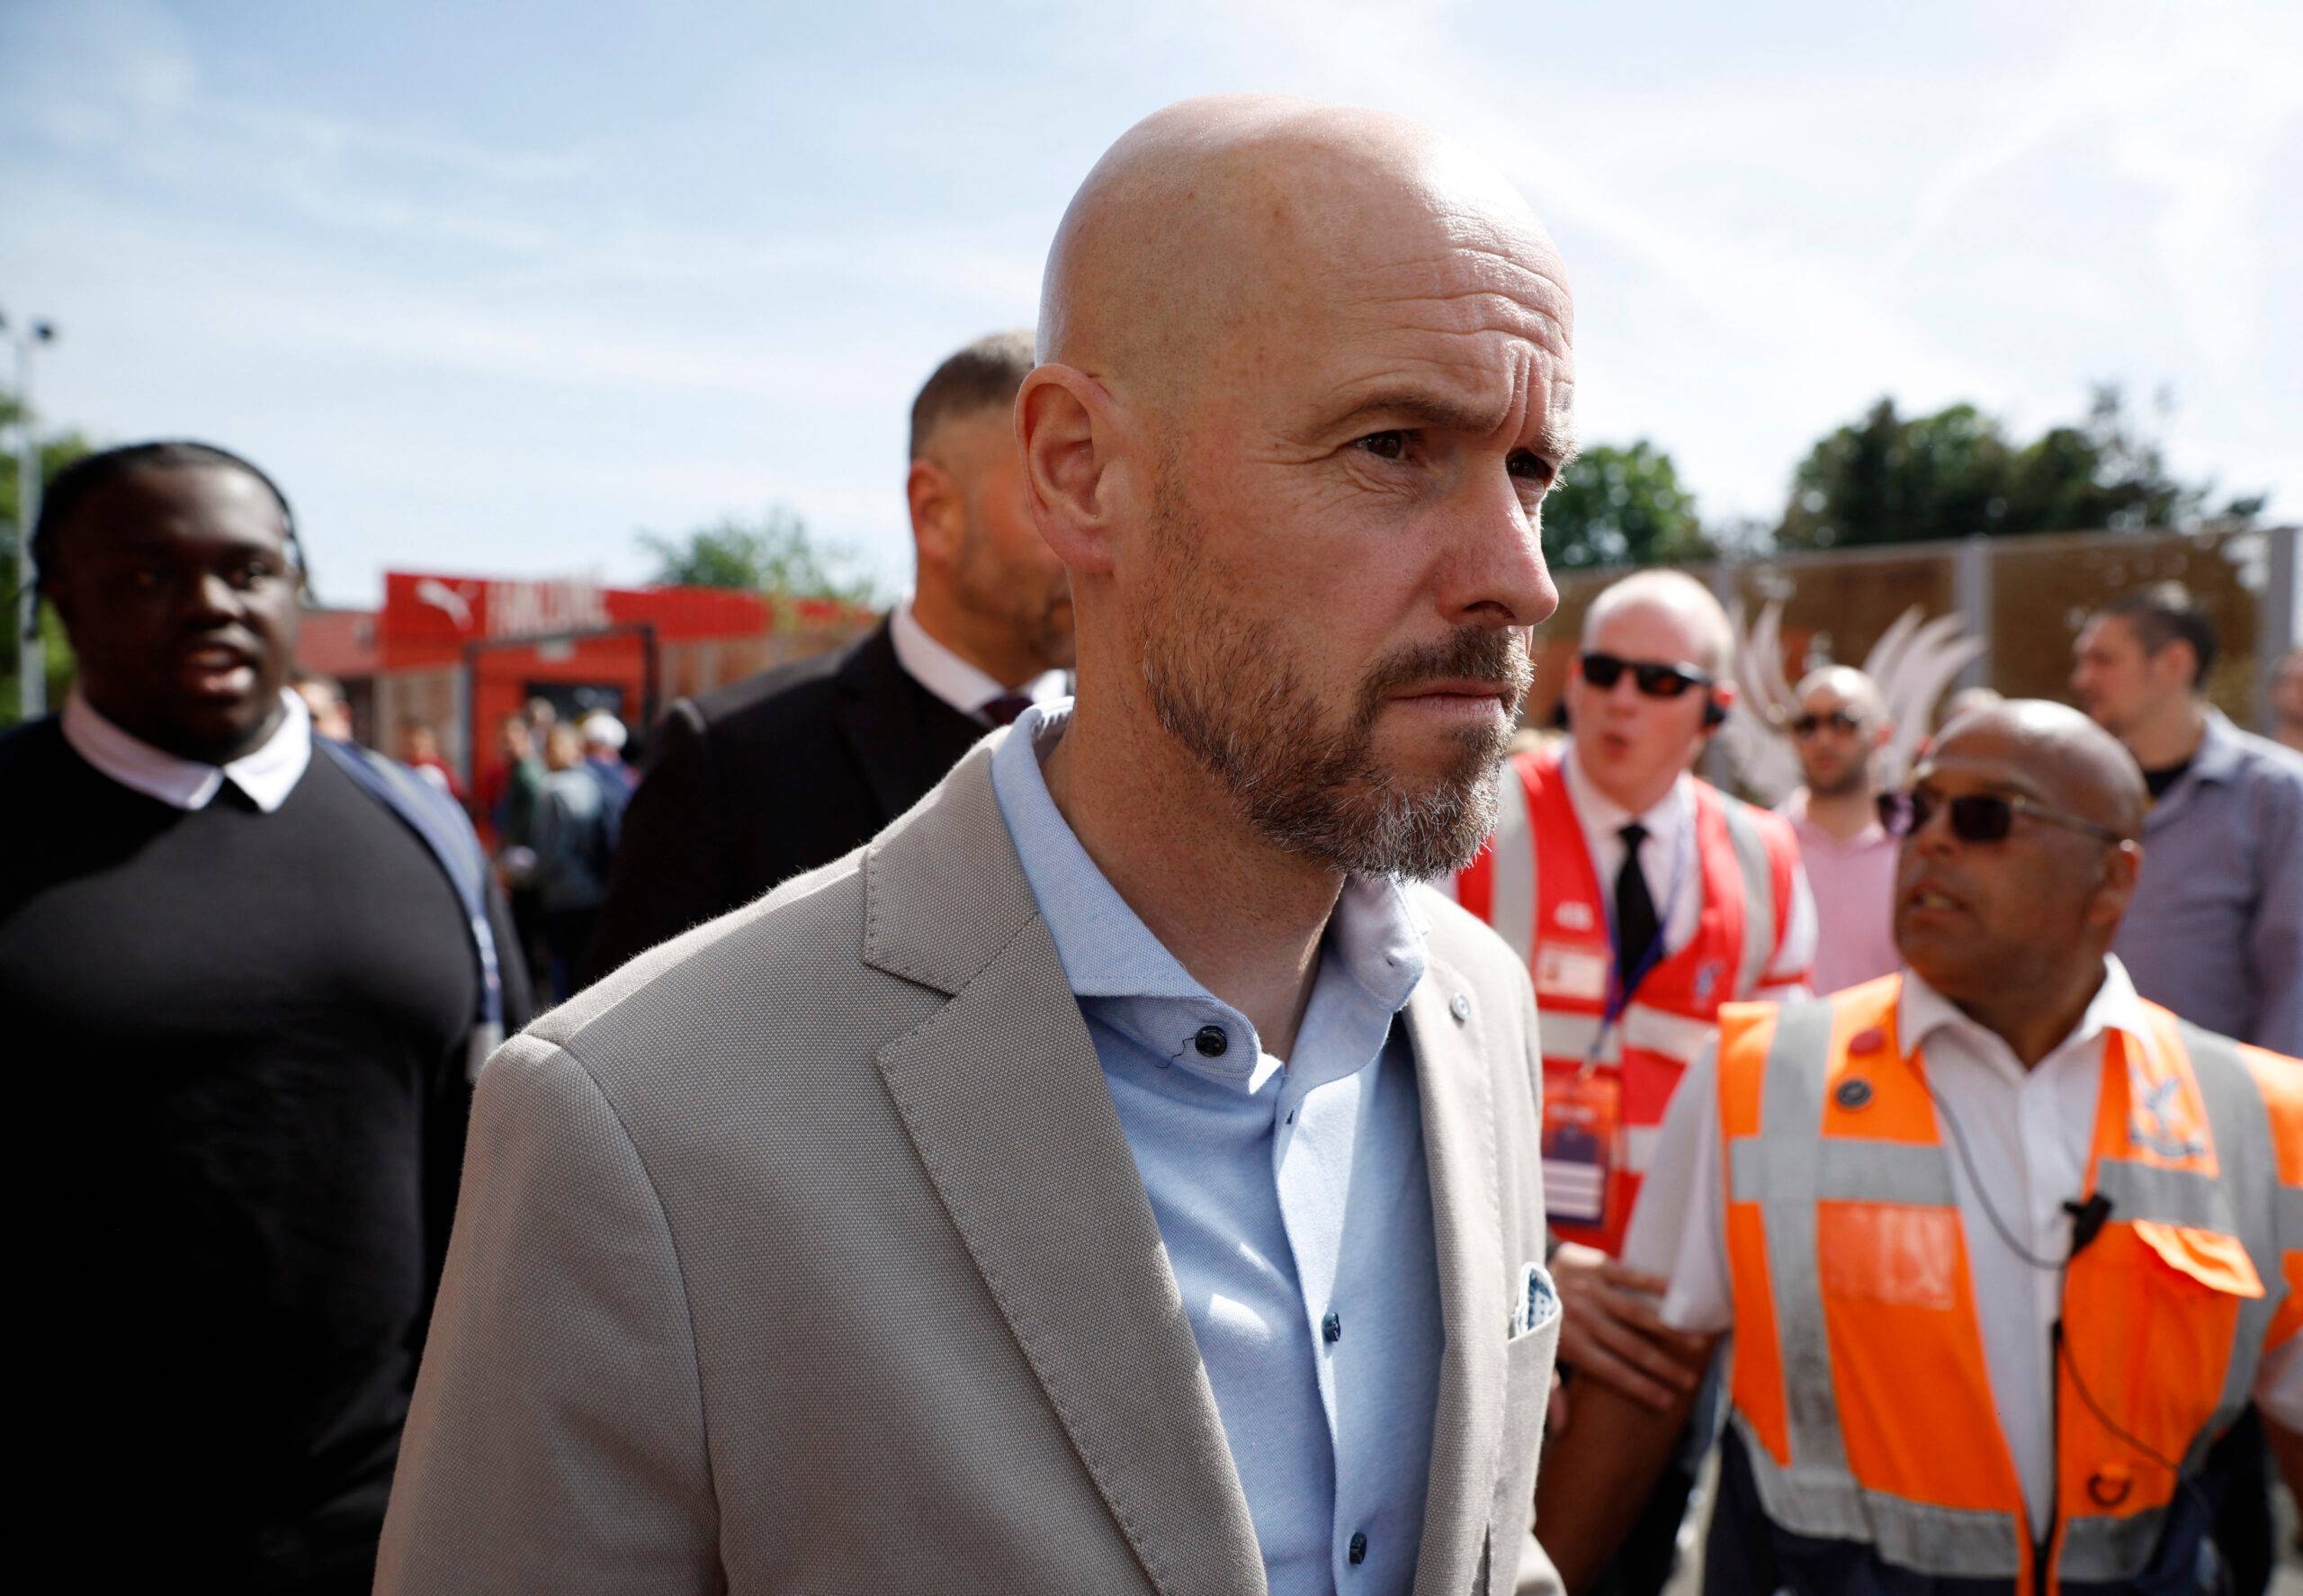 Erik ten Hag attends Manchester United's game at Crystal Palace